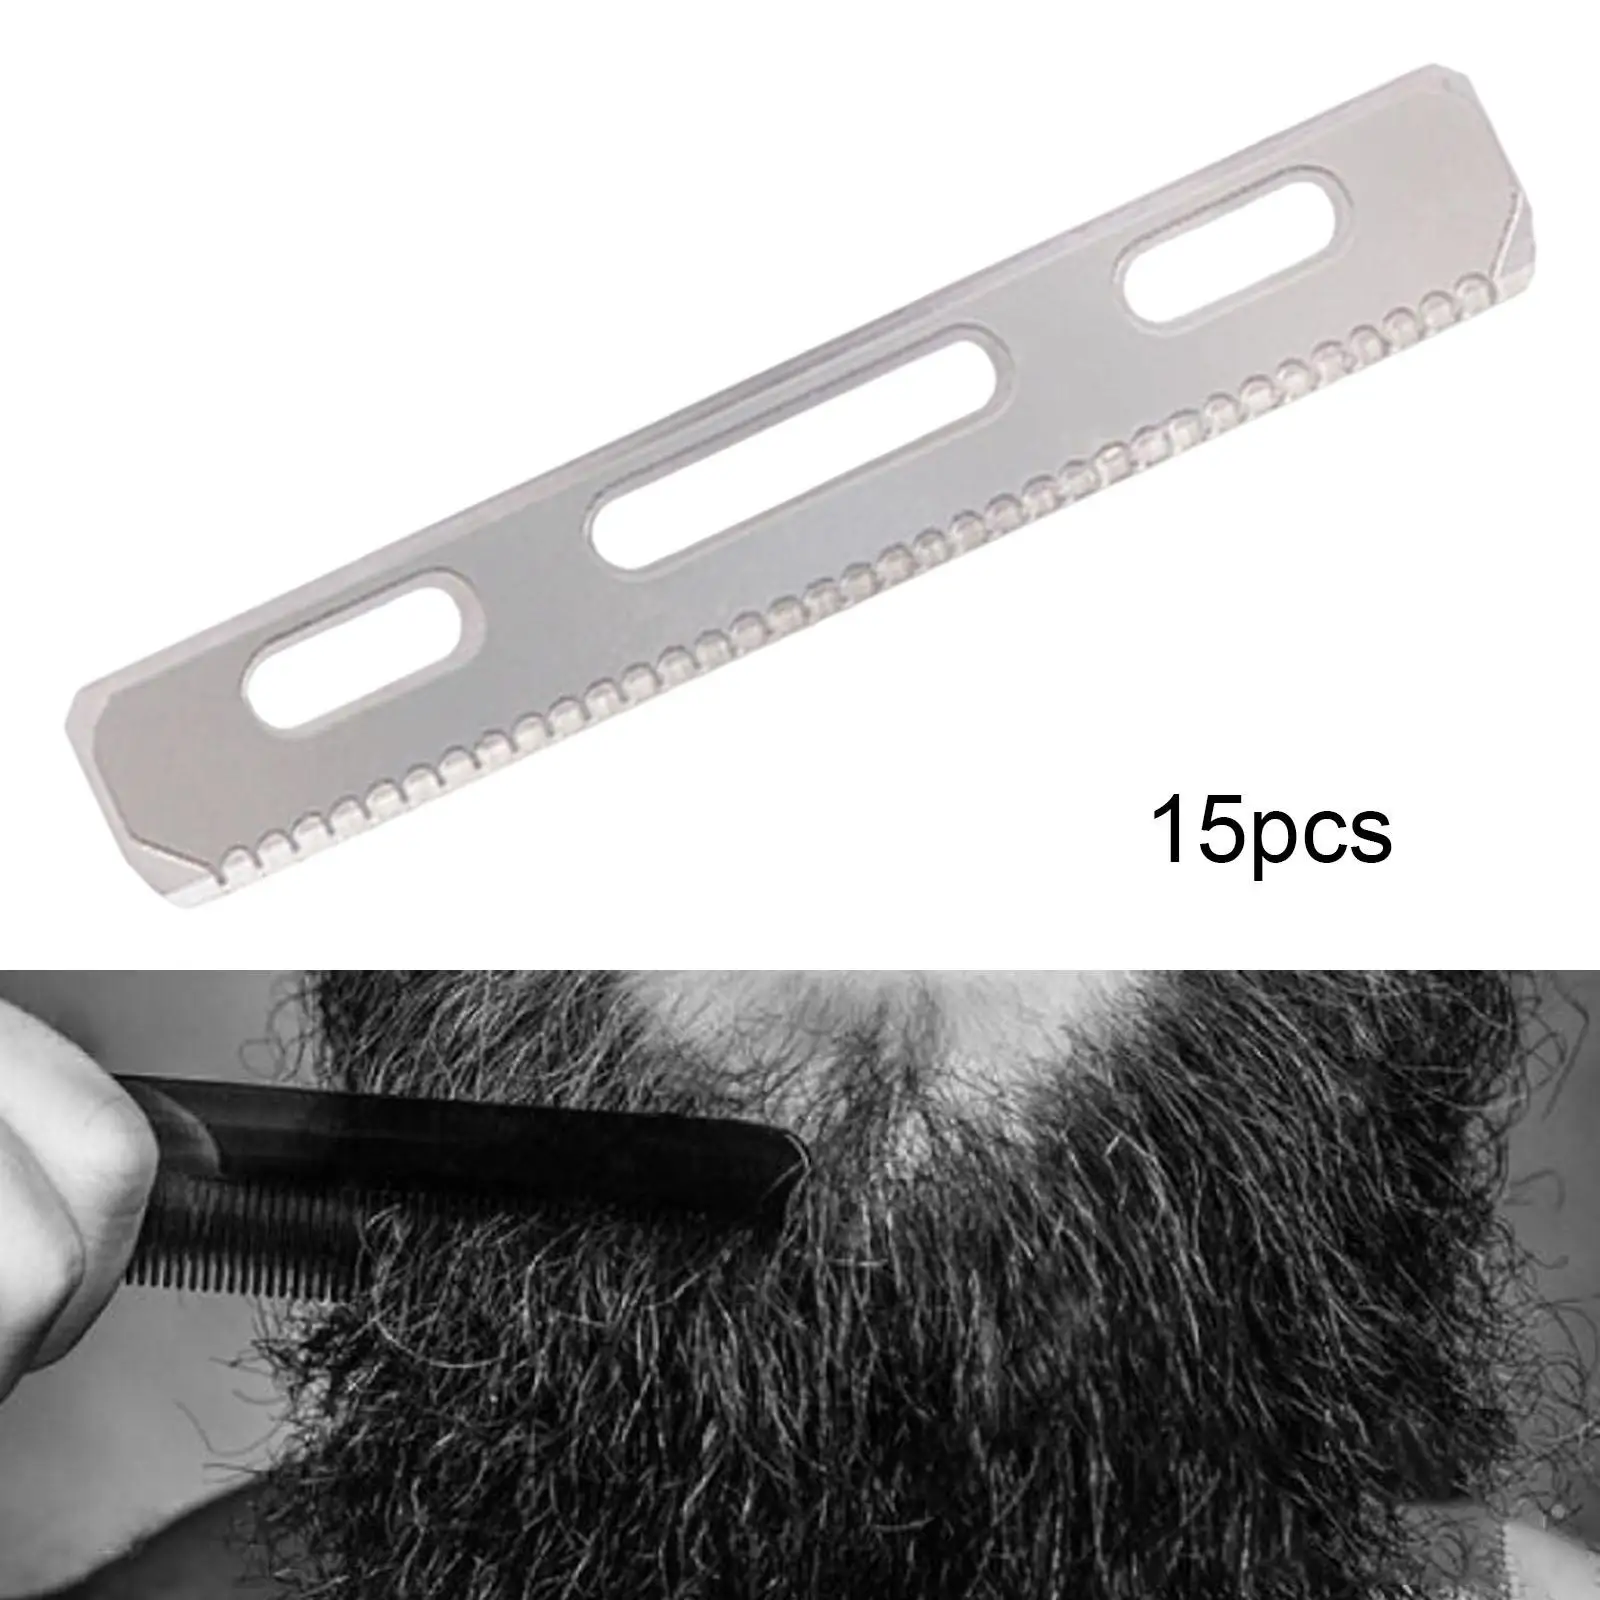 Eyebrow Trimmer Blades Facial Eyebrow Hair Removers Makeup with Cover Eyebrow Shaping Shaver Knife for Women Men